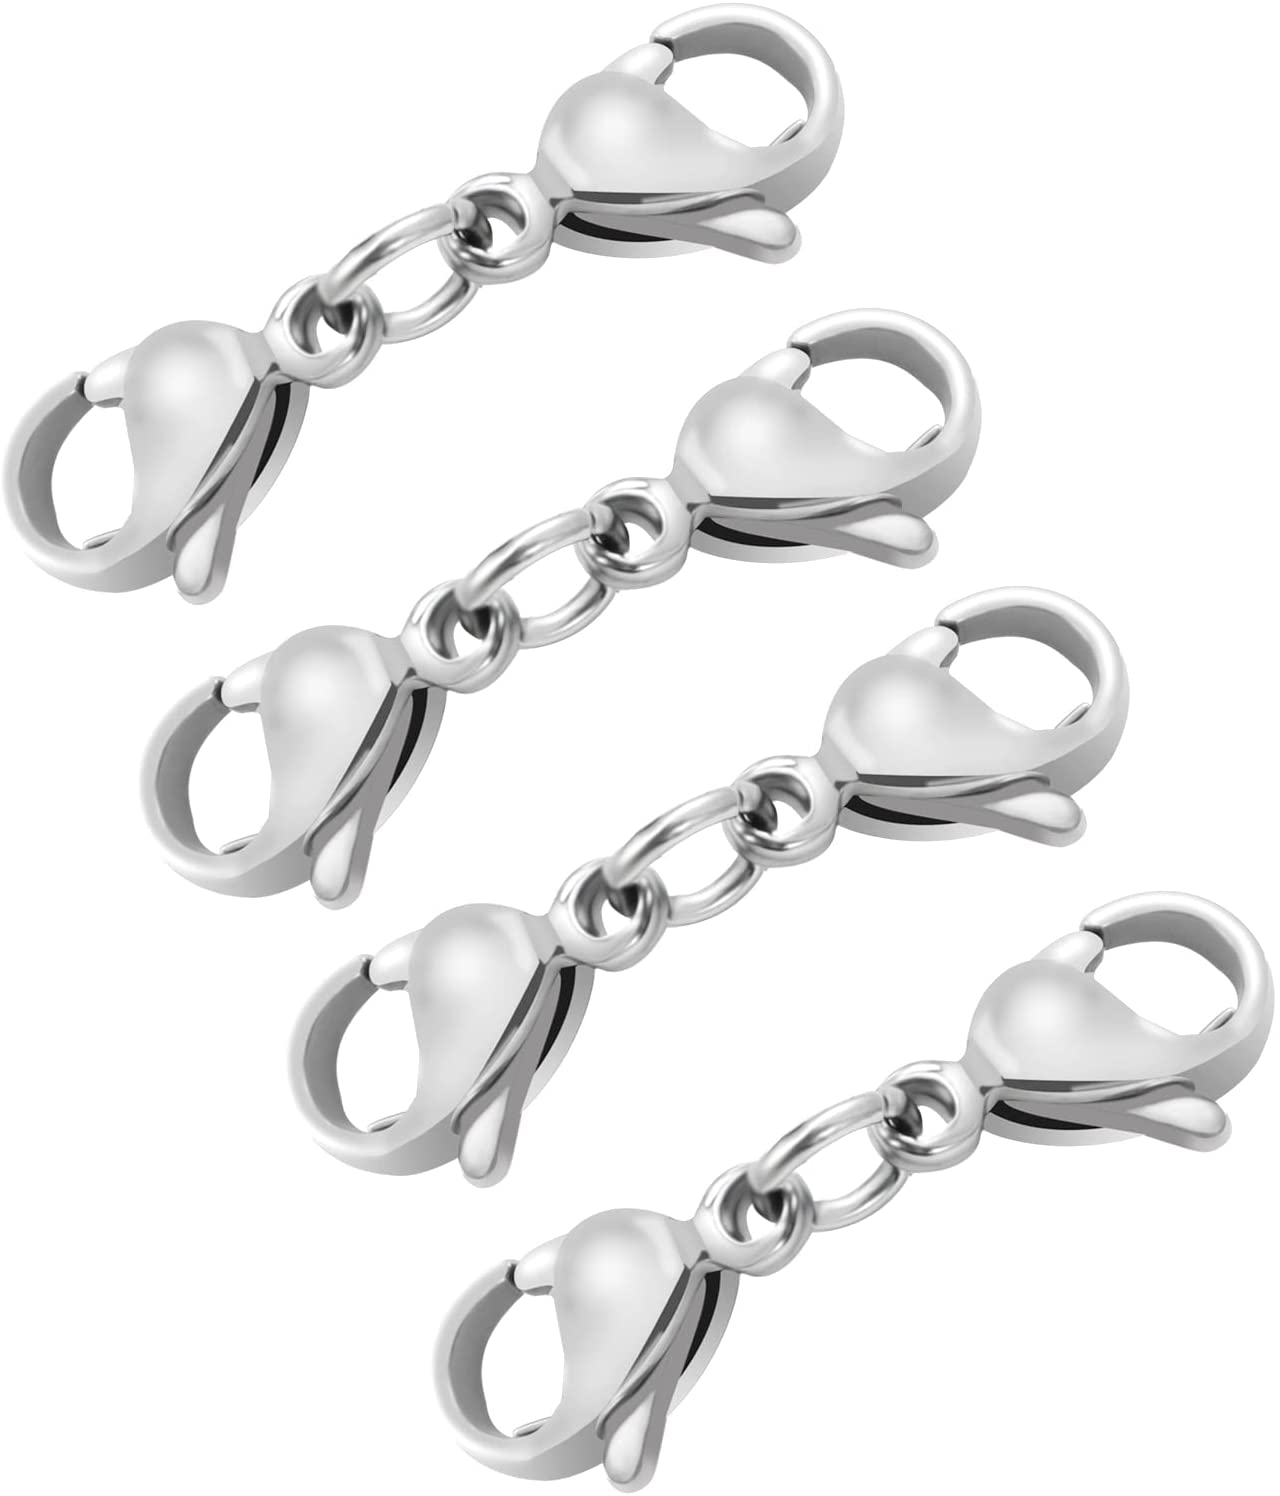 4 Pcs Double Lobster Clasp Extender, Double Claw Connector Silver Bracelet Extender Clasps Small Necklace Shortener Clasp for DIY Jewelry Making, 24mm